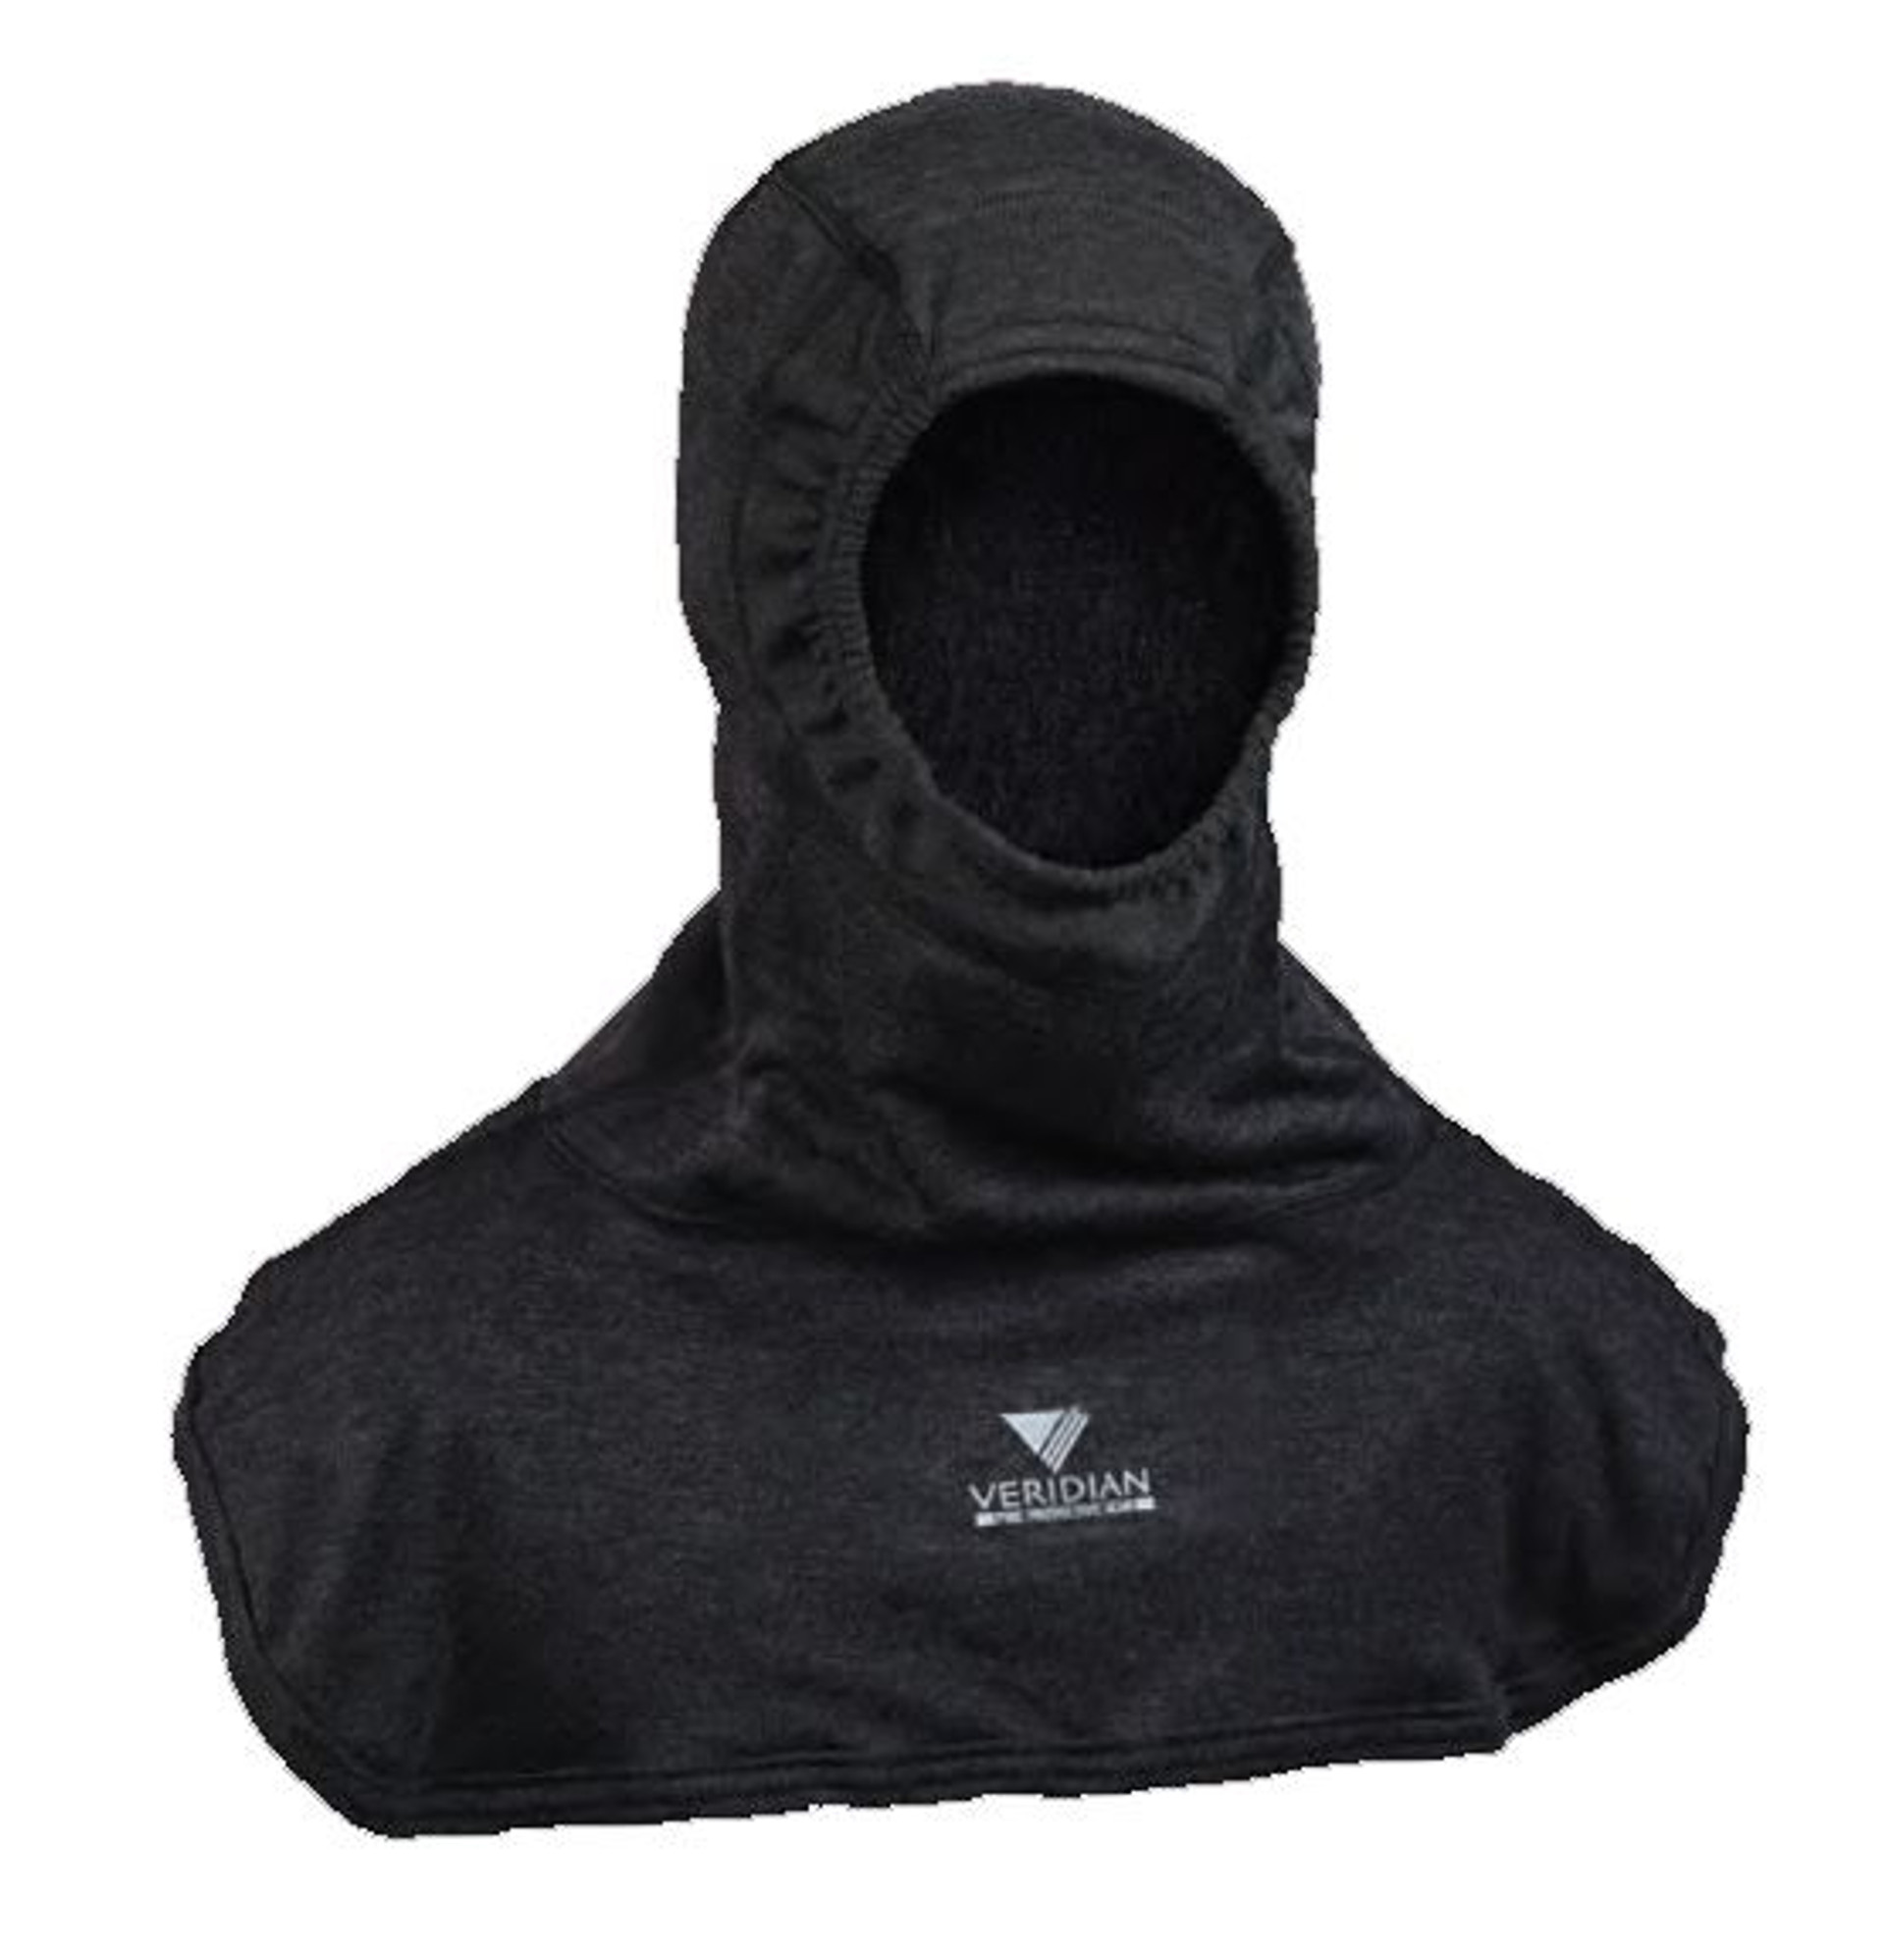 Veridian Viper Max Particulate Barrier Hood with Nomex Nano Flex